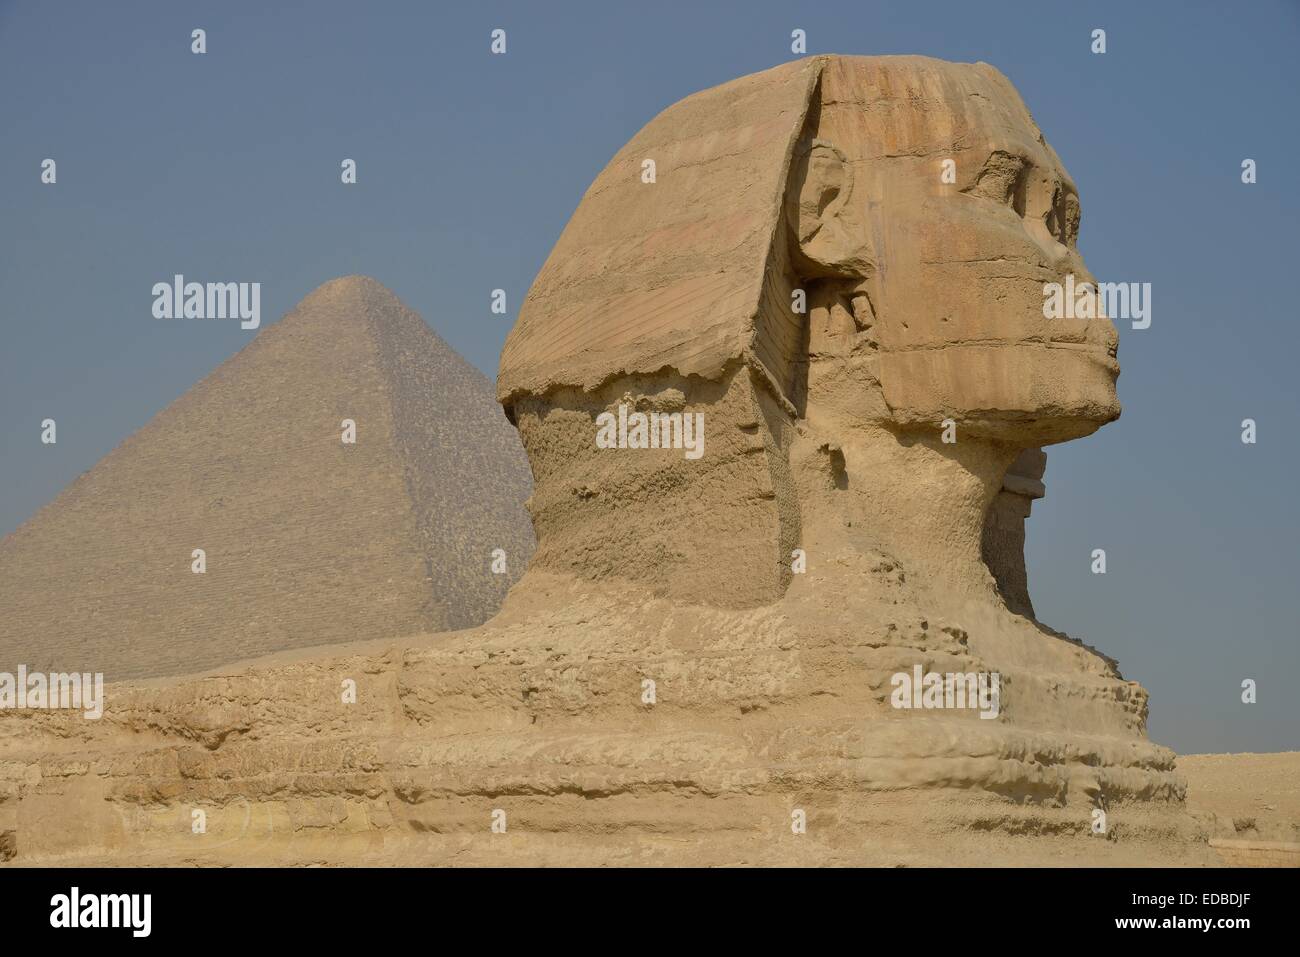 Sphinx or Great Sphinx of Giza, lion with a human head, built in the 4th Egyptian dynasty around 2700 BC, in front of the Stock Photo